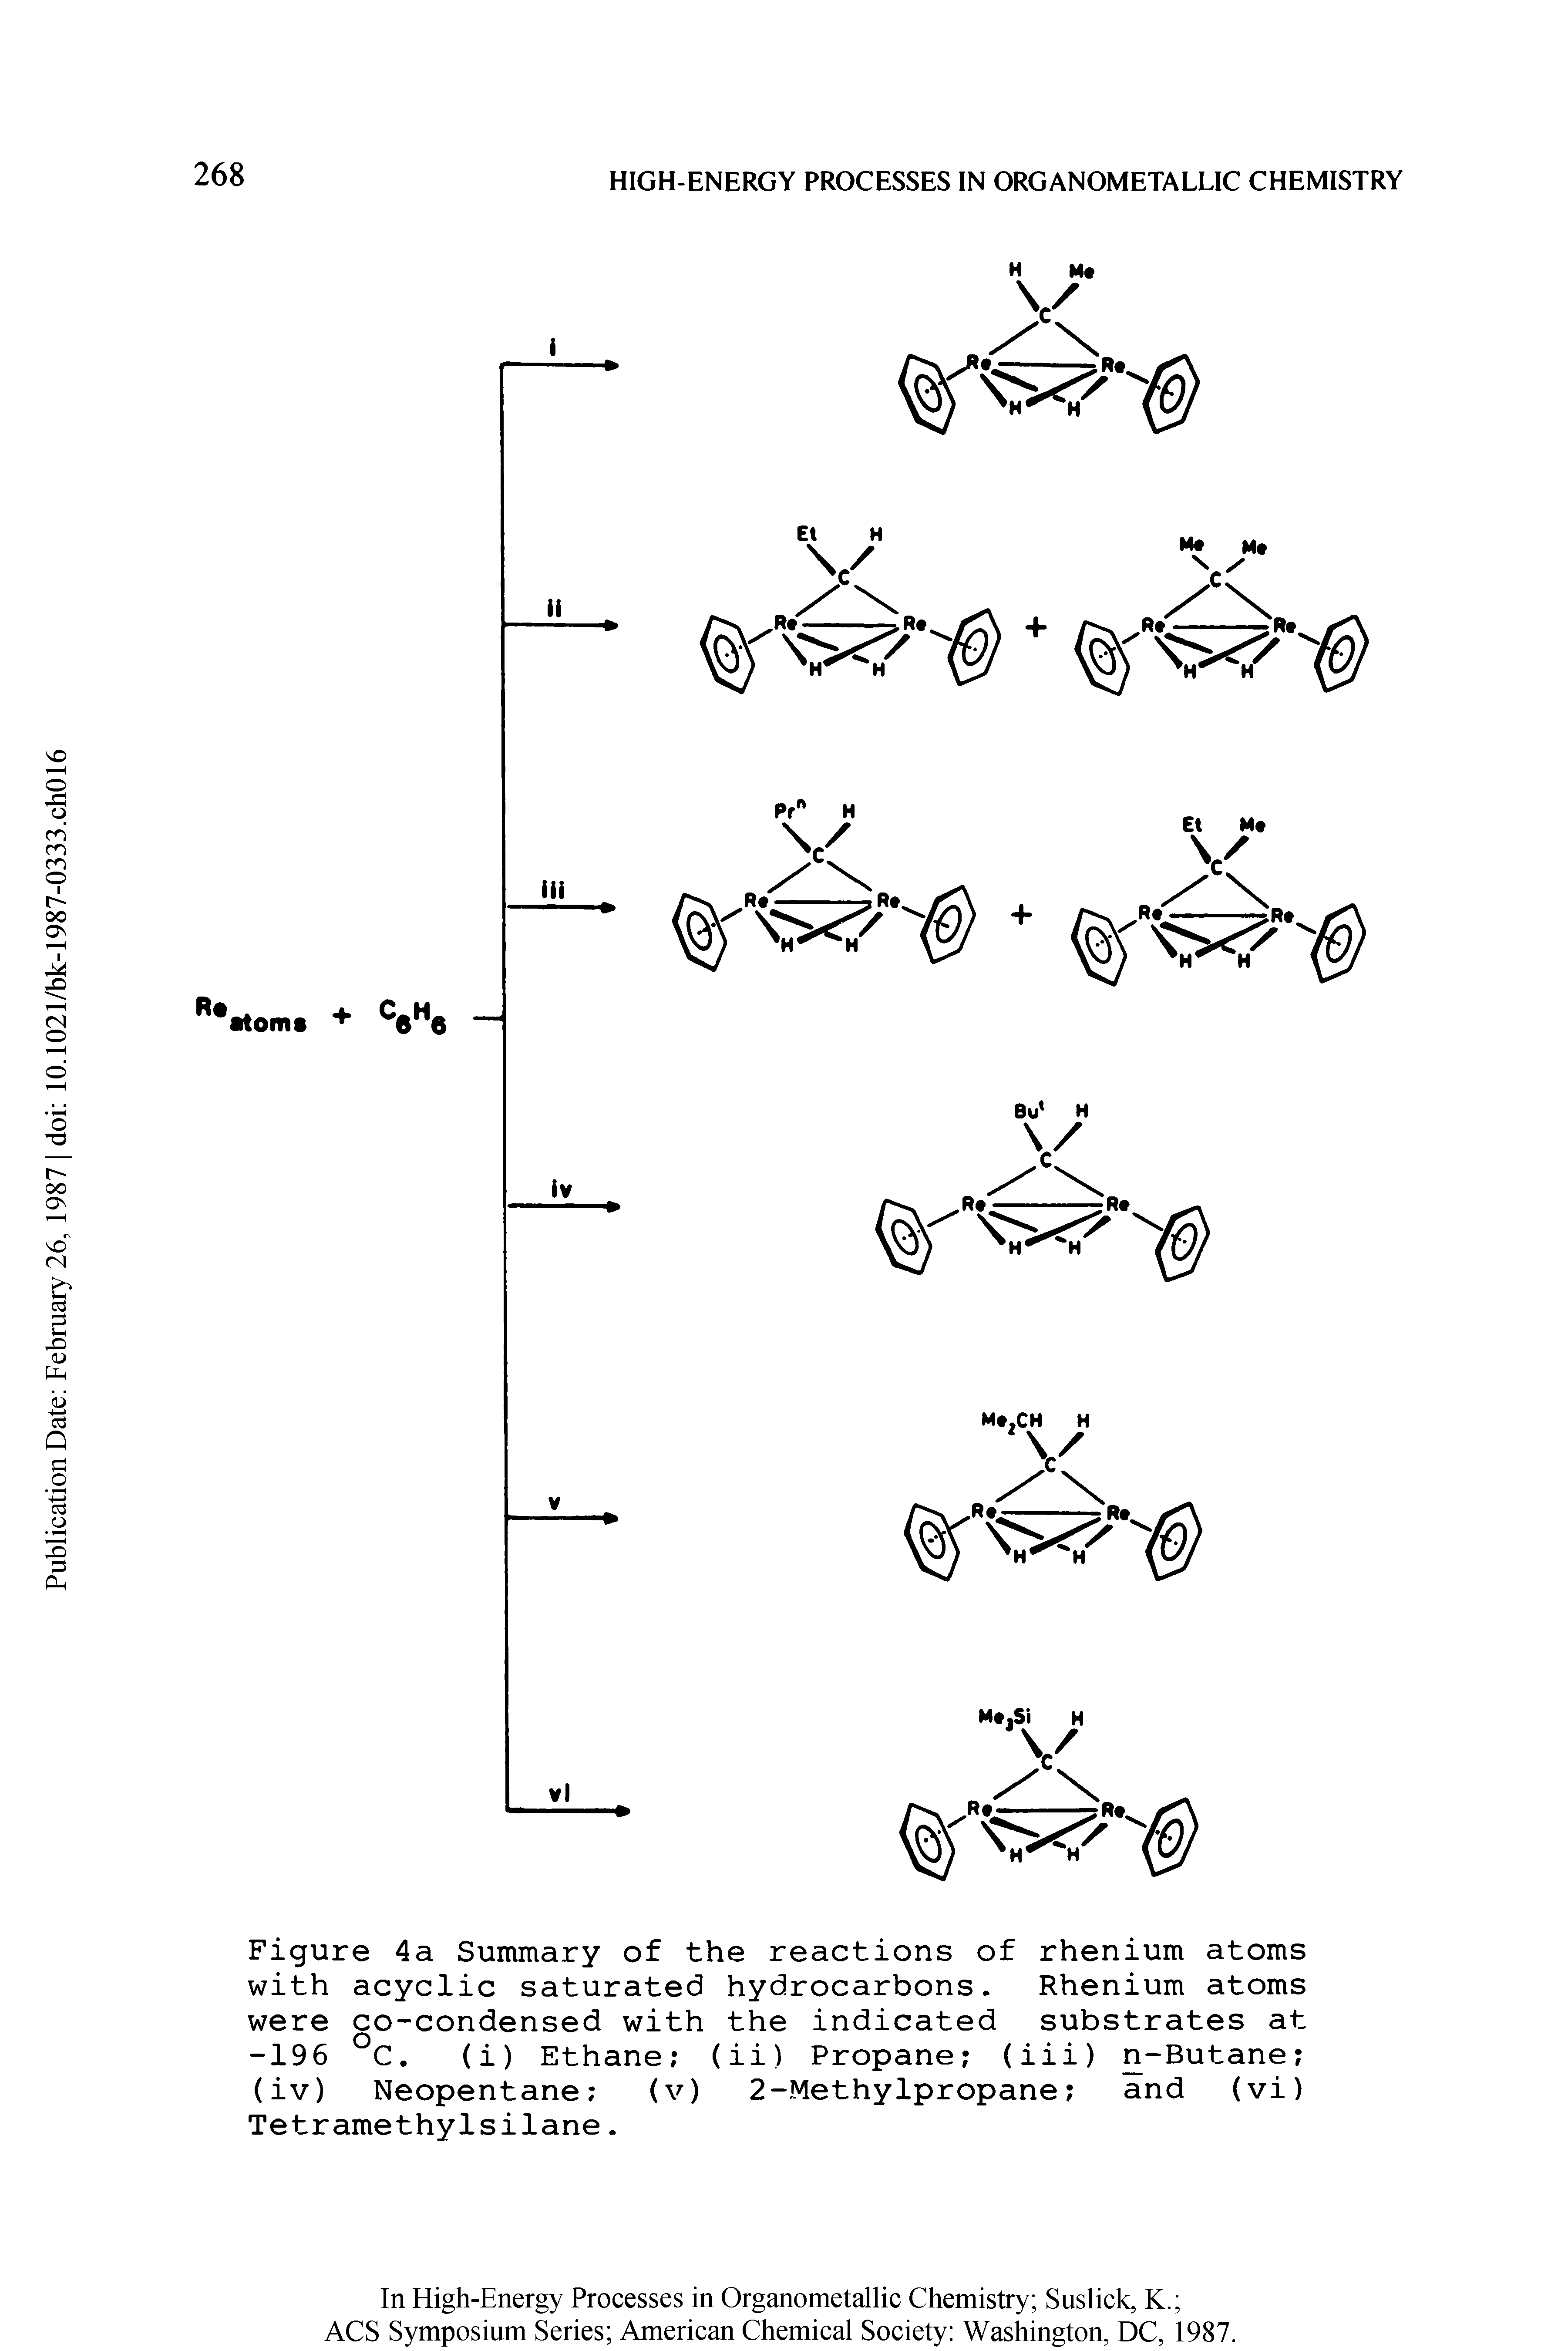 Figure 4a Summary of the reactions of rhenium atoms with acyclic saturated hydrocarbons. Rhenium atoms were co-condensed with the indicated substrates at -196 °C. (i) Ethane (ii) Propane (iii) n-Butane (iv) Neopentane (v) 2-Methylpropane and (vi) Tetramethylsilane.